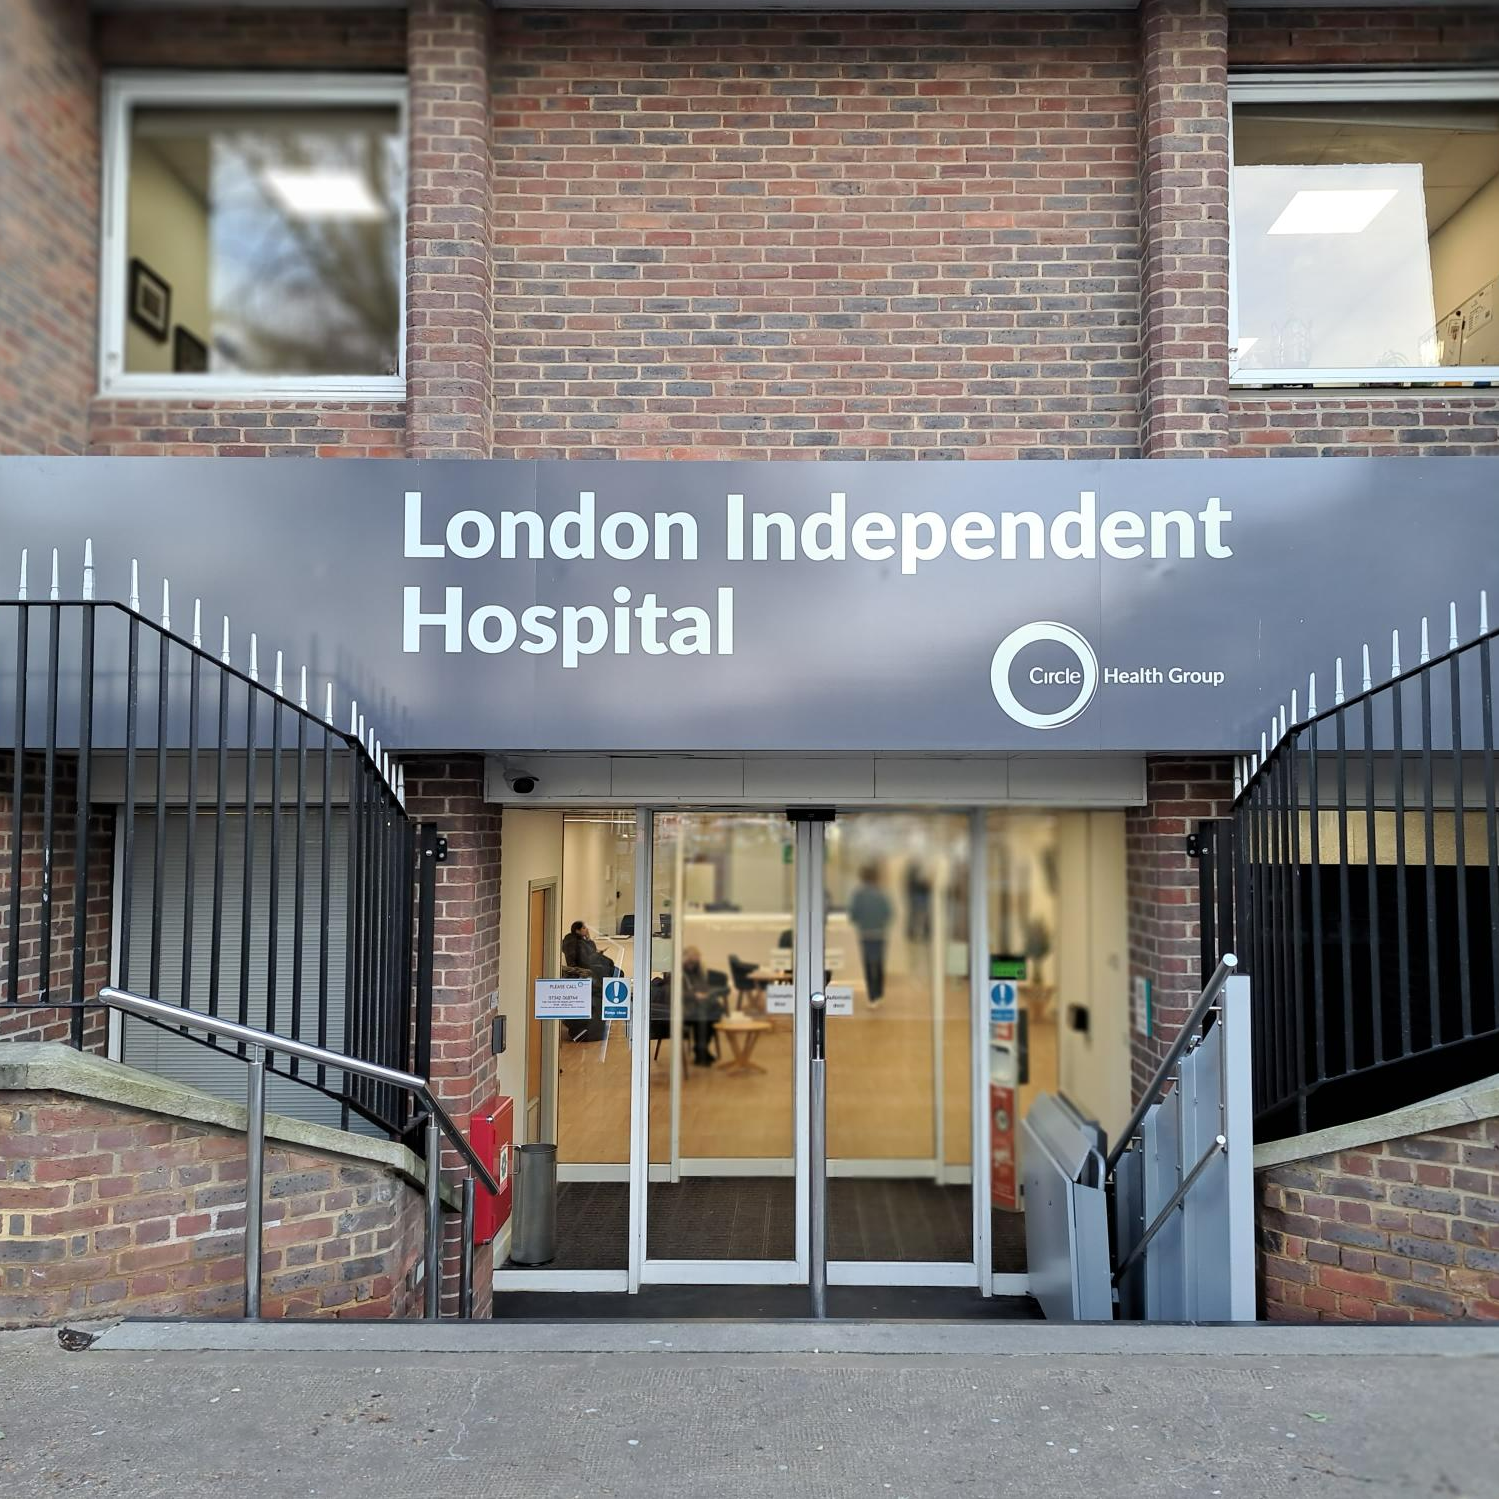 The London Independent Hospital